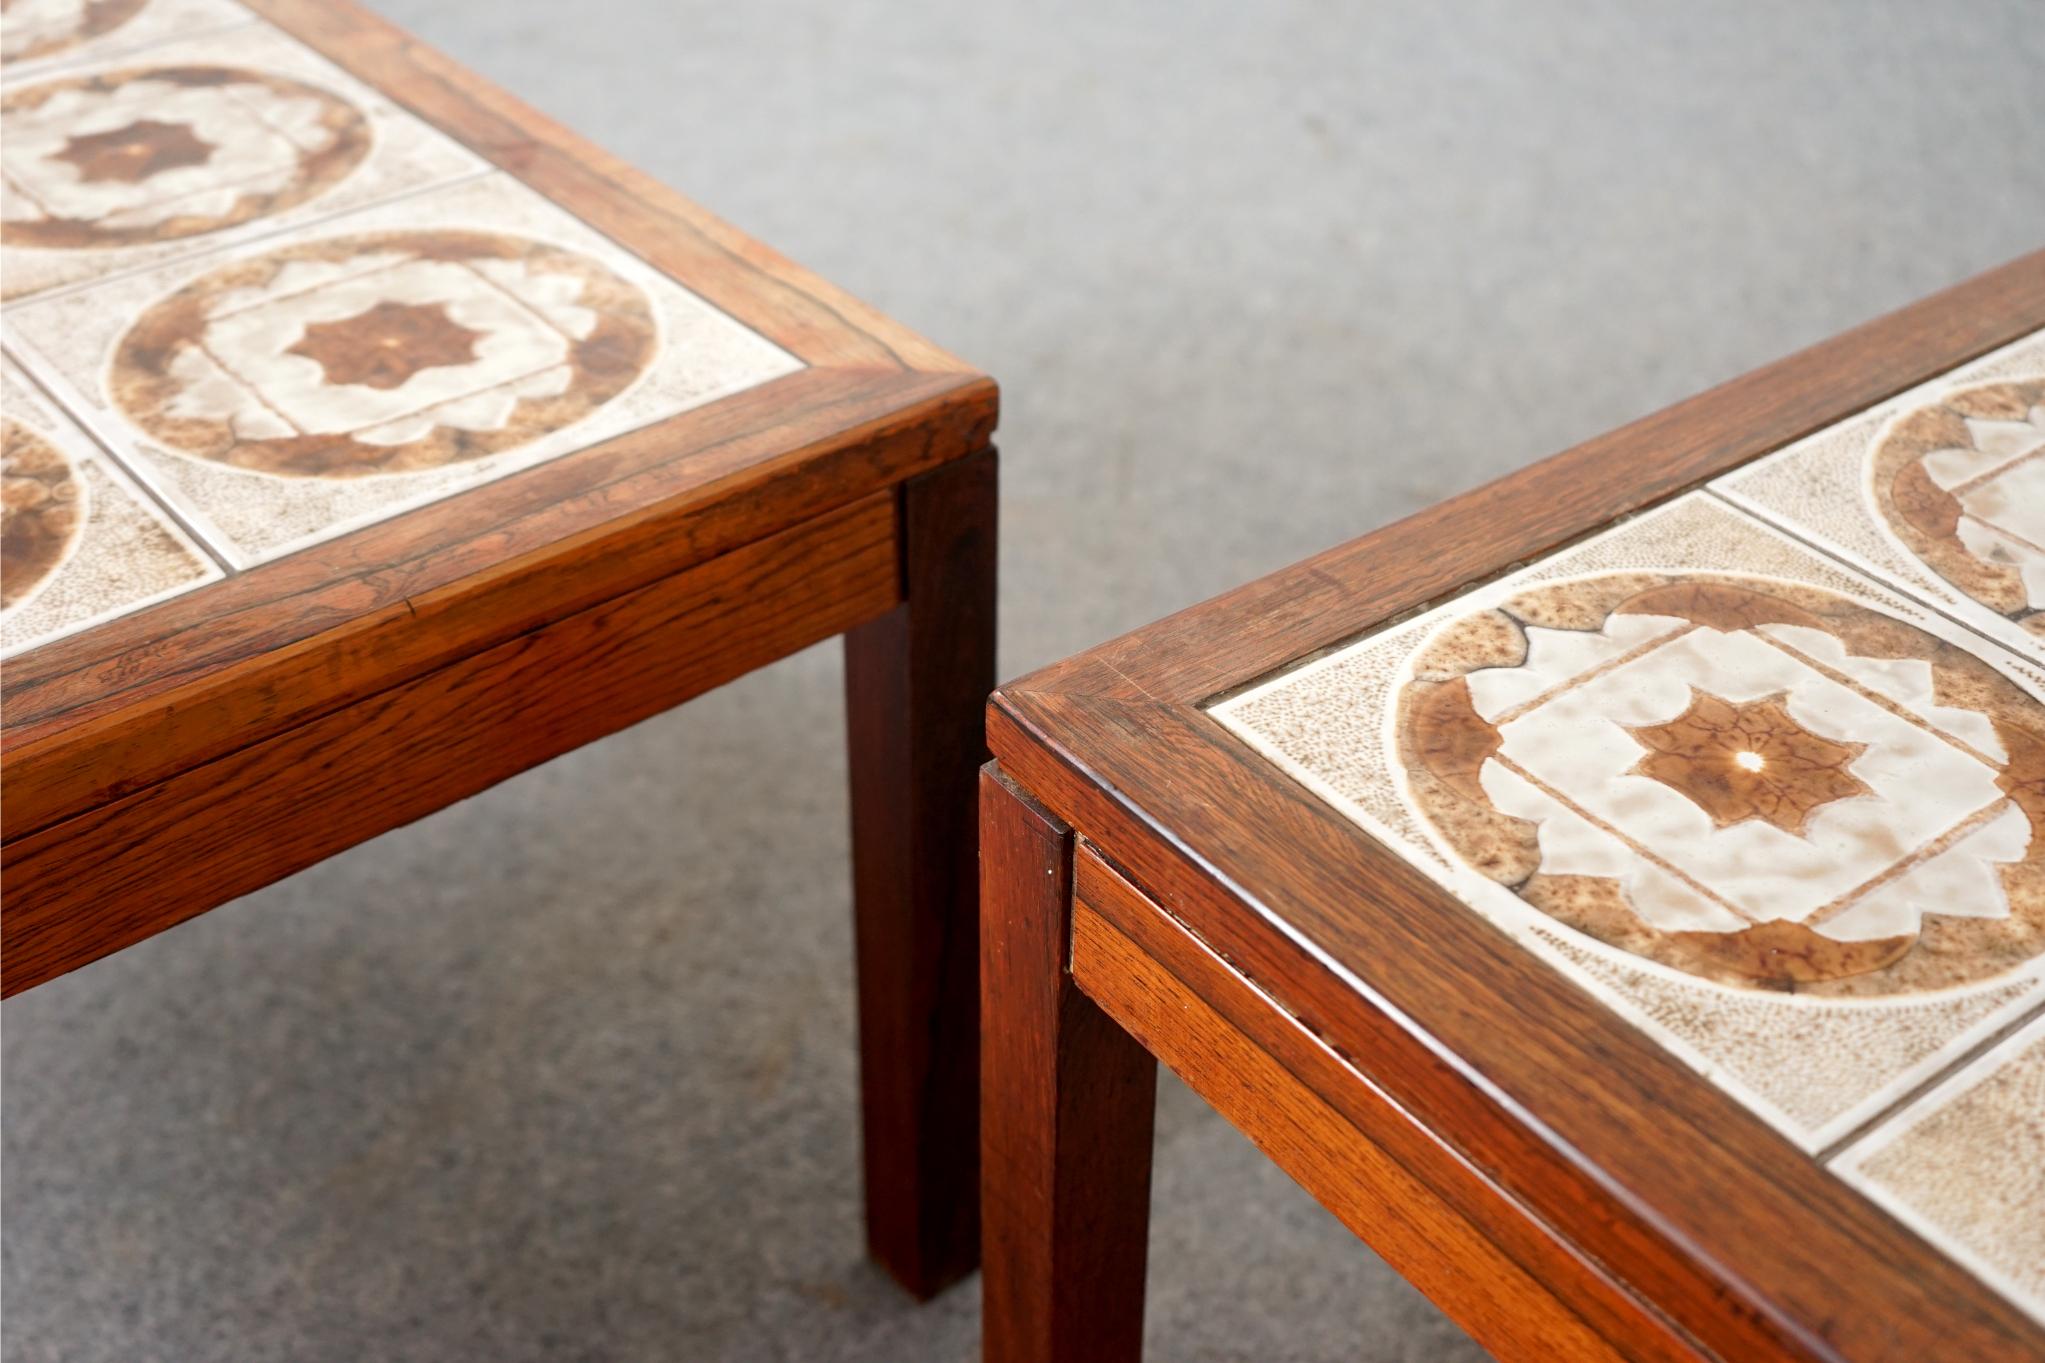 Rosewood & tile side table pair, circa 1960's. Rosewood framed tiled top offers a surface that can 